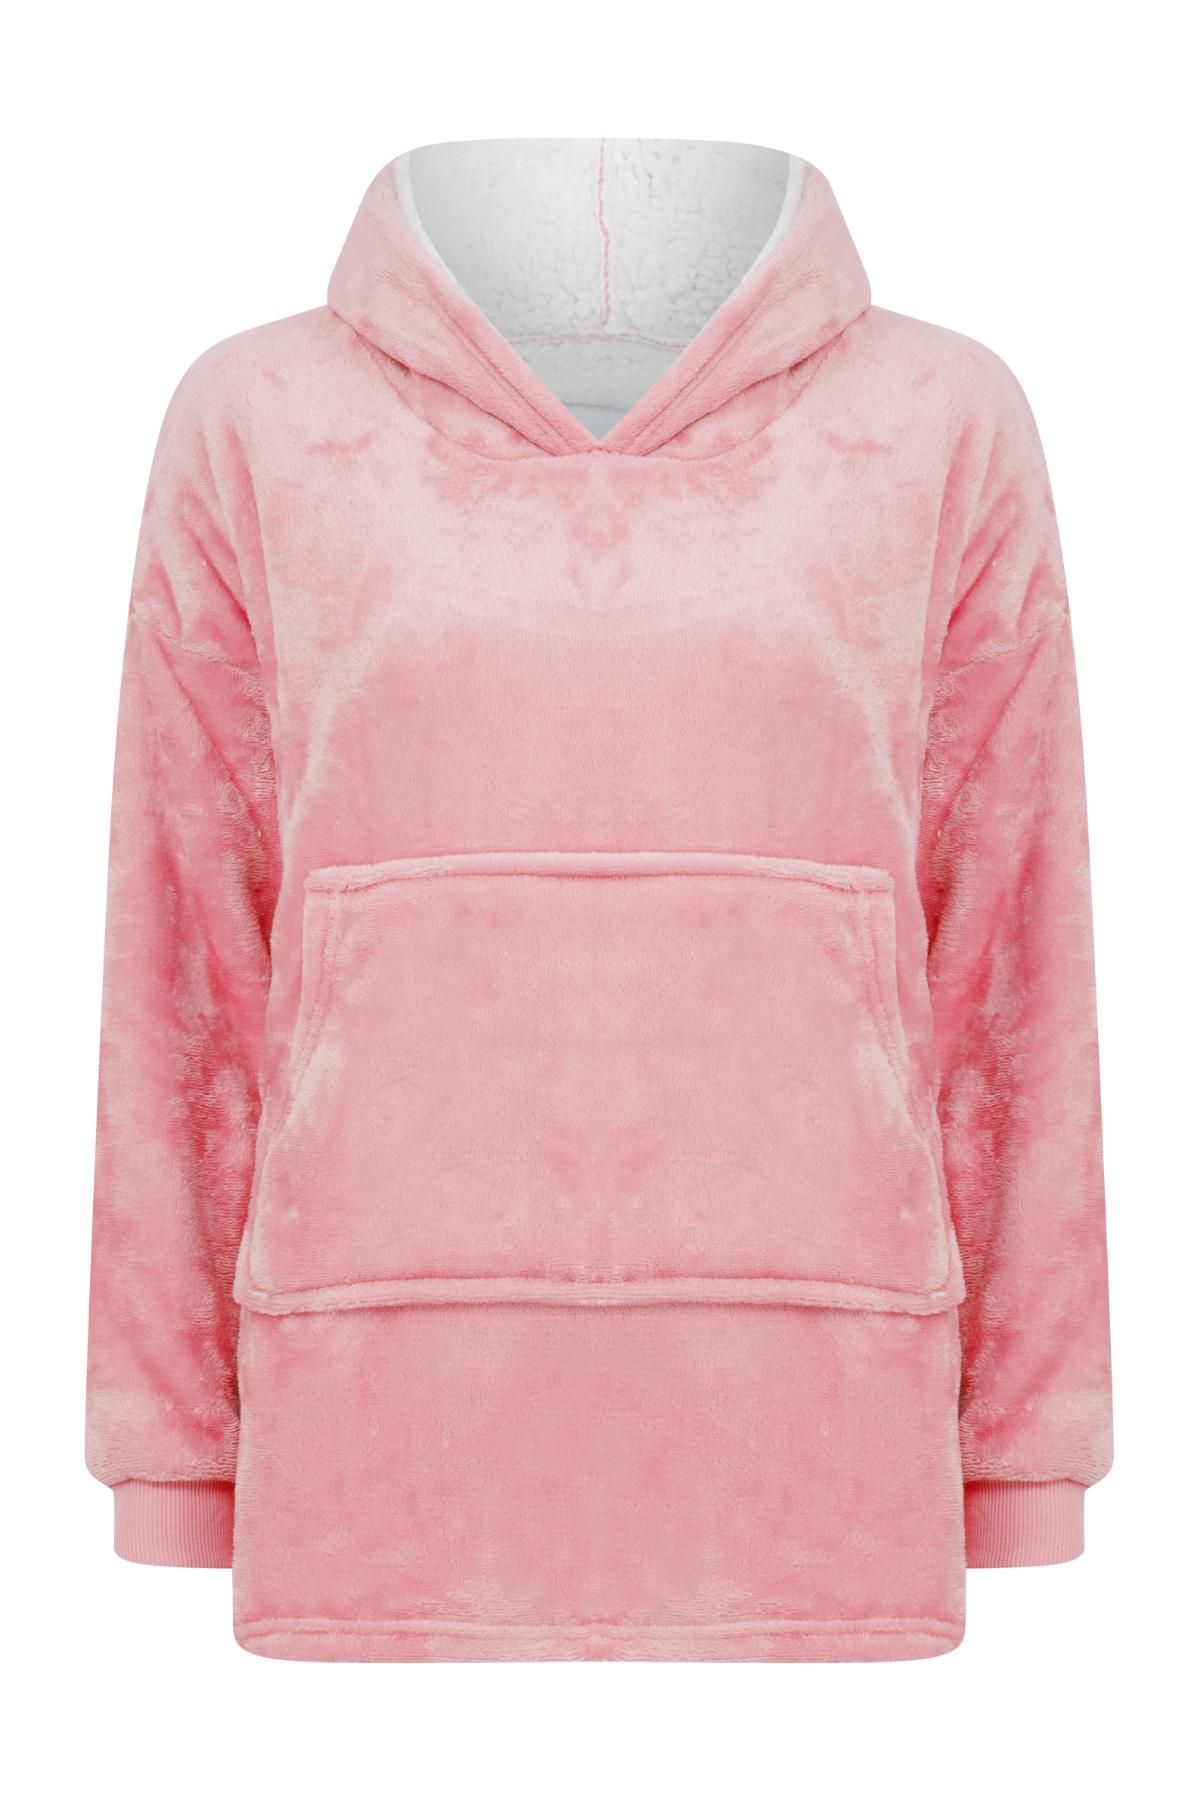 Tokyo Laundry Womens Oodie Pink